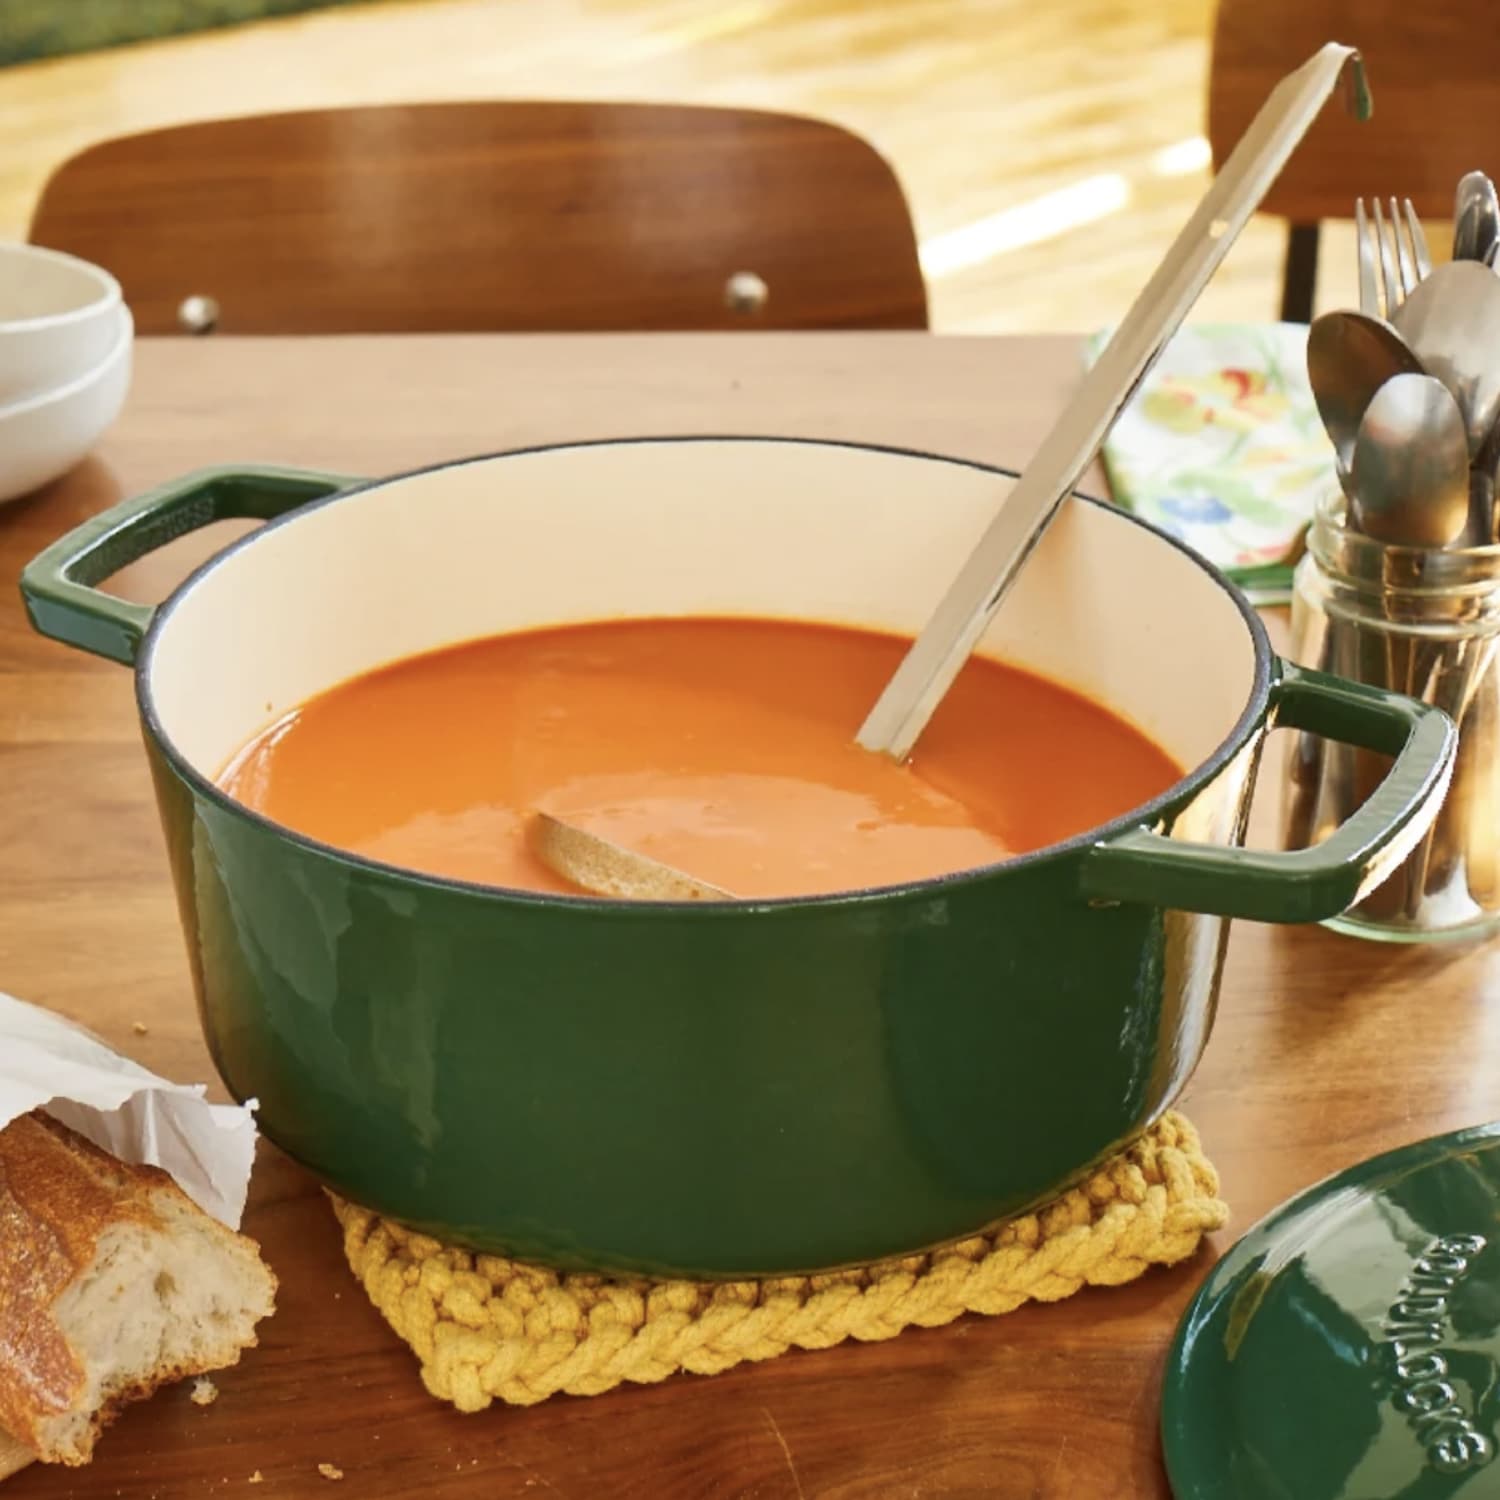 Le Creuset Multi-Materials 20-Pc. Cookware Set, Created for Macy's - Macy's